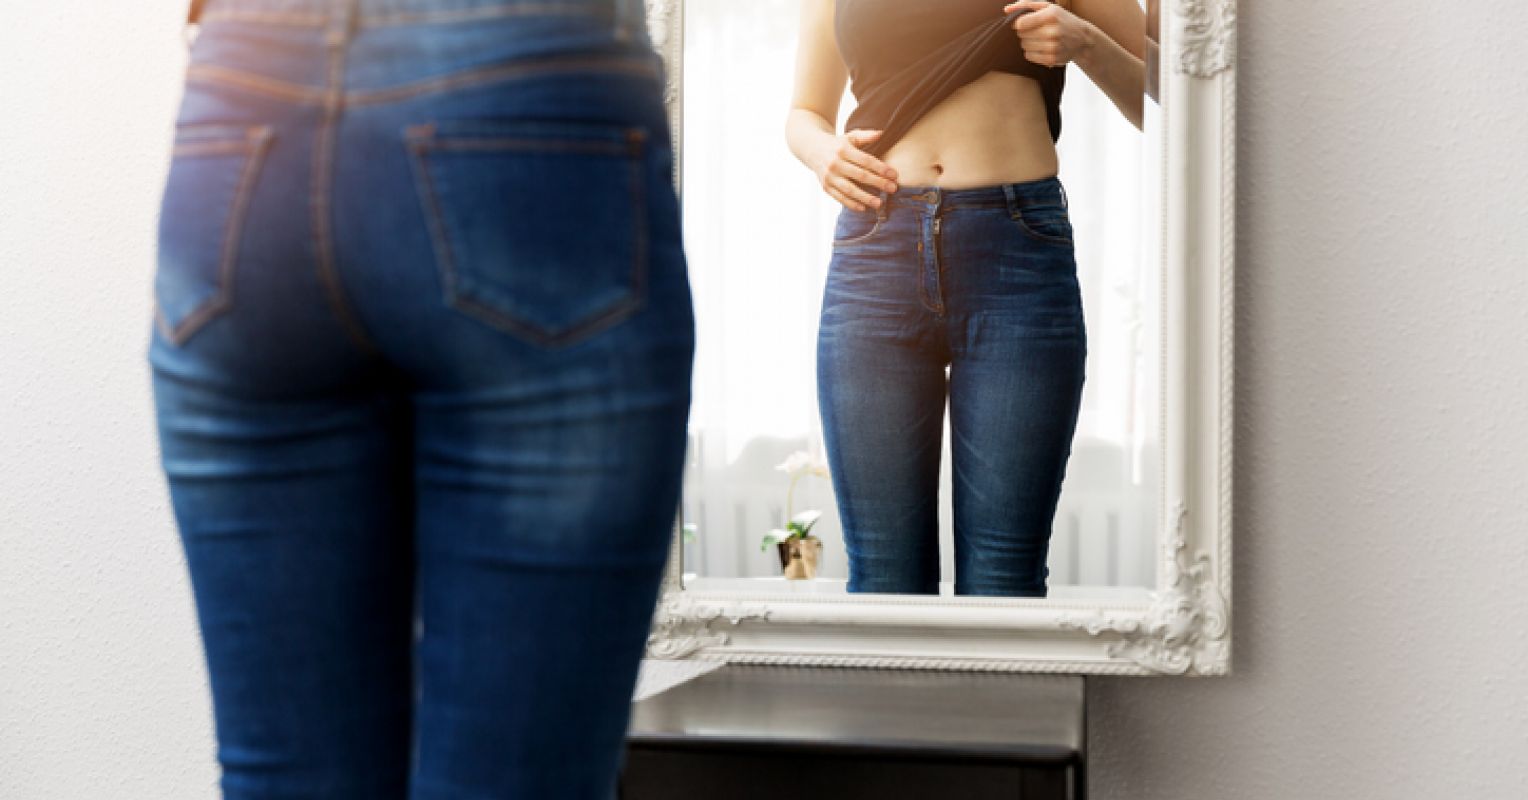 Is Body Image Affecting Your Sex Life? Psychology Today